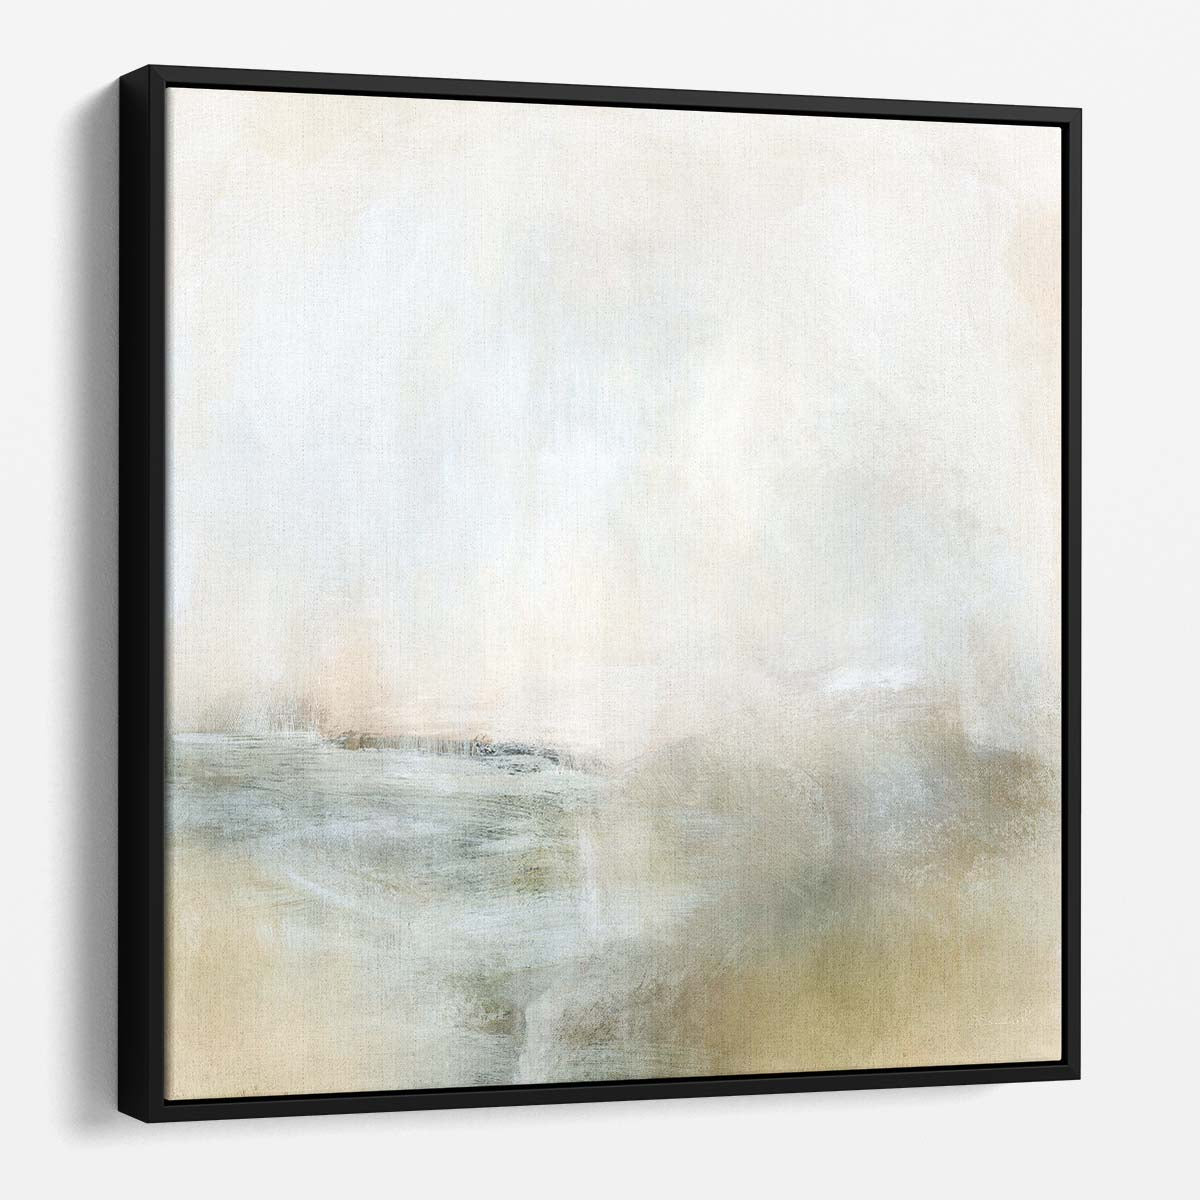 Abstract Golden Landscape Acrylic & Oil Wall Art by Luxuriance Designs. Made in USA.